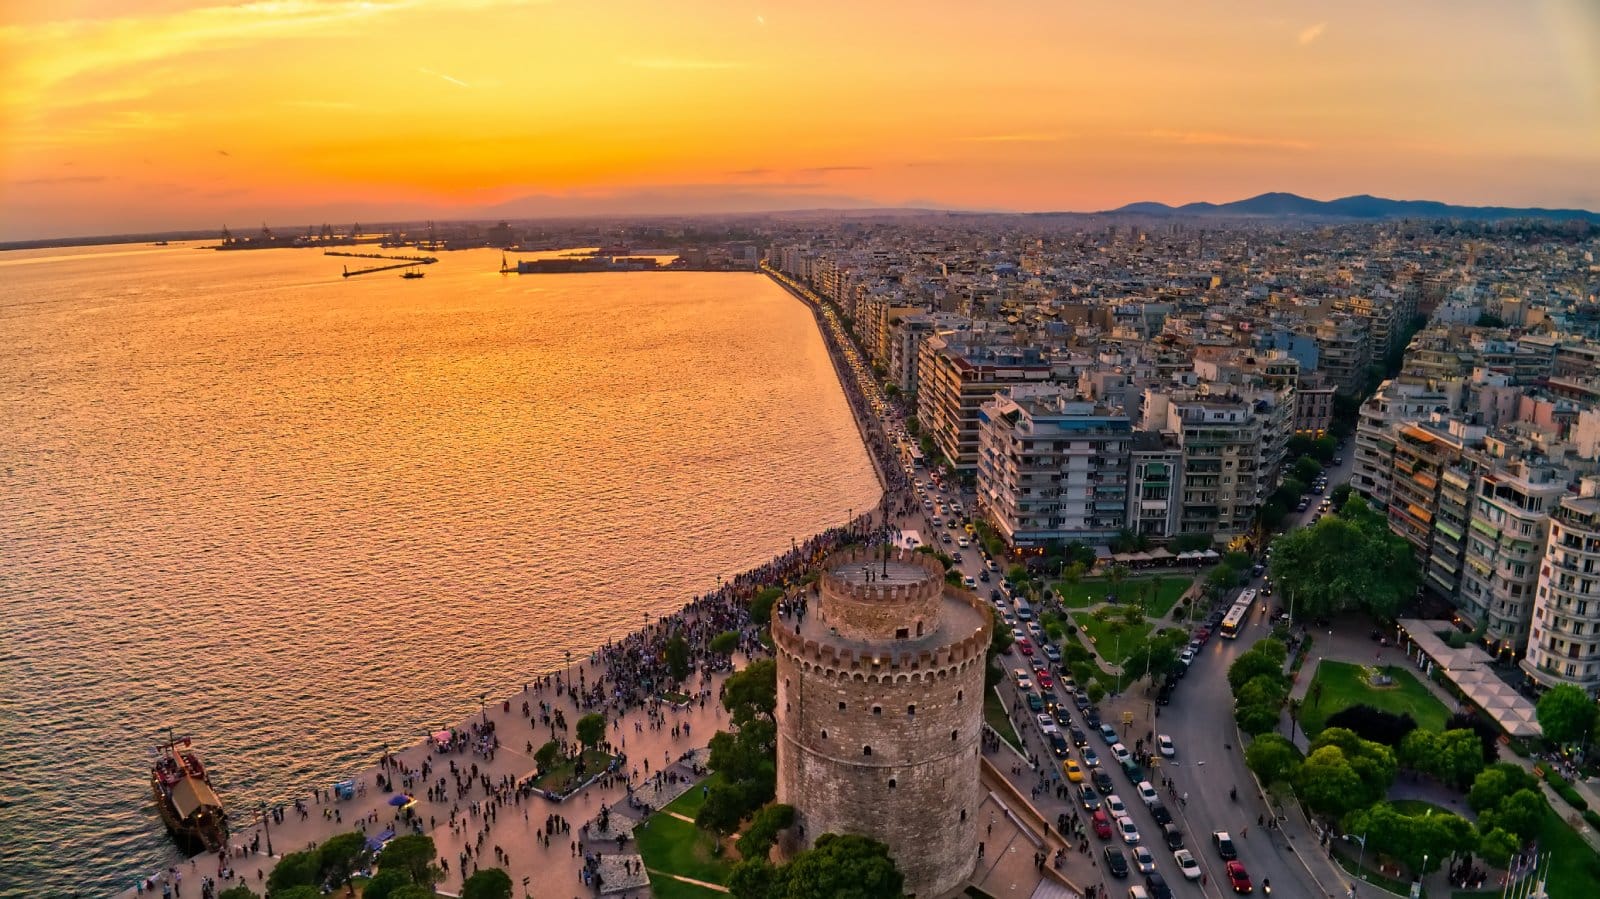 <p class="wp-caption-text">Image Credit: Shutterstock / Ververidis Vasilis</p>  <p>Thessaloniki is perfect for foodies on a budget, with its waterfront promenade, historic sites, and affordable marketplaces.</p>